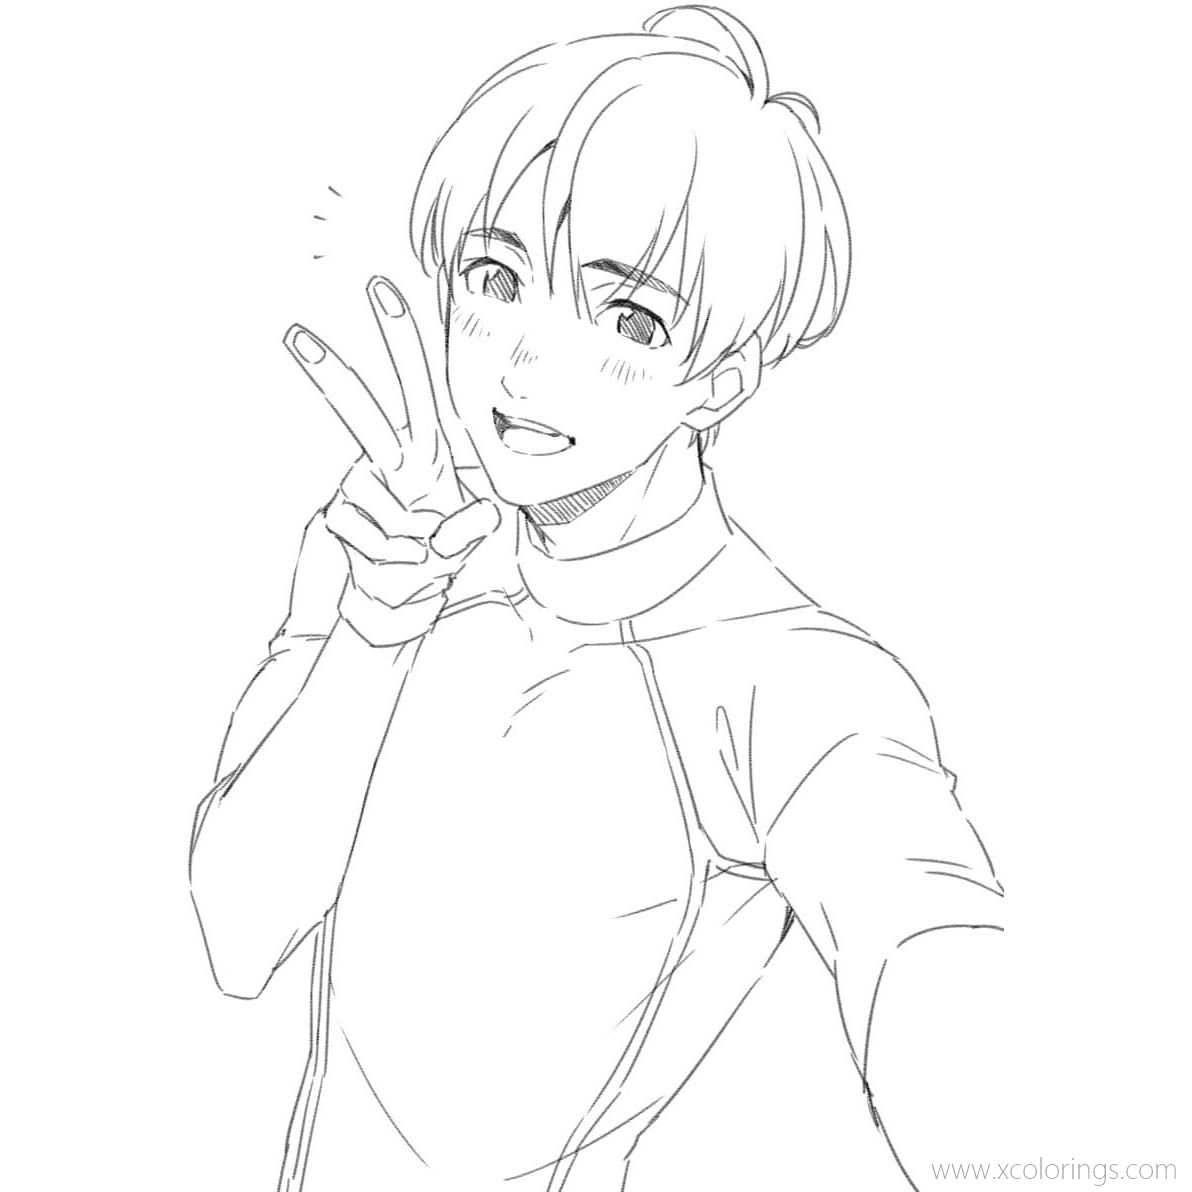 Free Yuri on Ice Coloring Pages Black and White printable